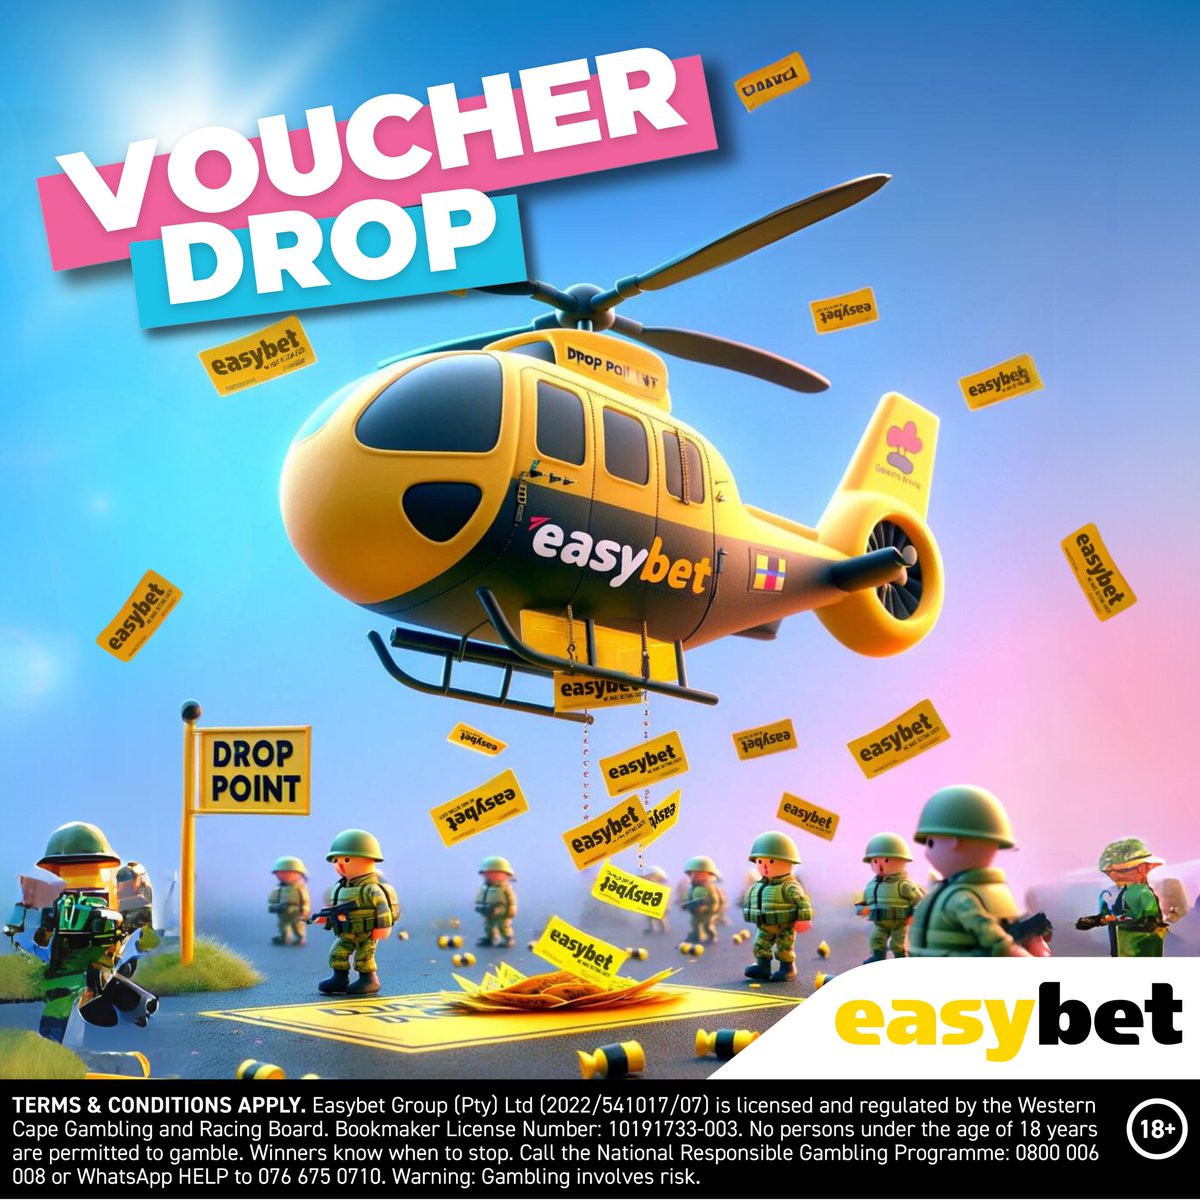 🎟️Brace yourselves, it's Voucher Drop o'clock! 🎁 Your chance to snag a FREE Easybet voucher is coming tonight at 8 PM! Act fast, stay sharp—everyone's waiting! 🔥💸 Don't miss out on the fun, yellow army! 🚀 #VoucherDrop #Easybet